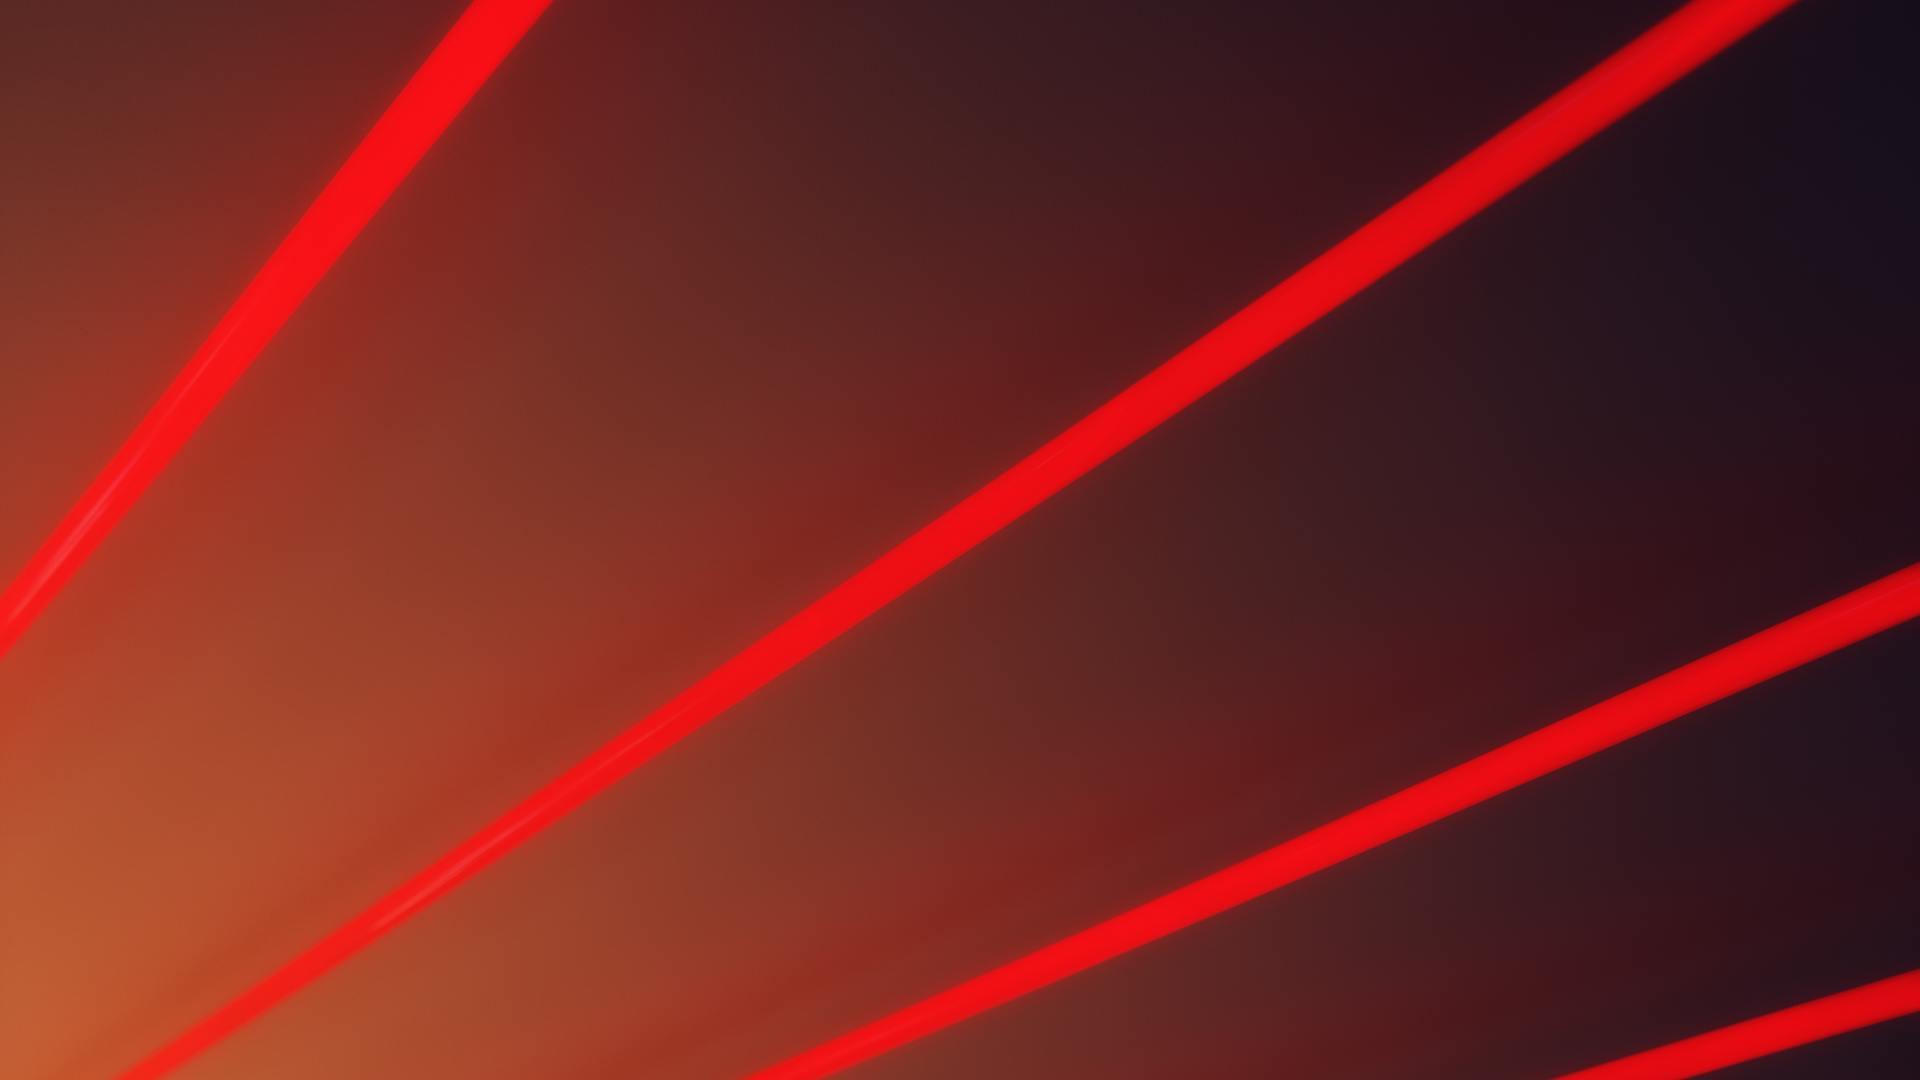 Red Light Beams Abstract 5k Laptop Full HD 1080P